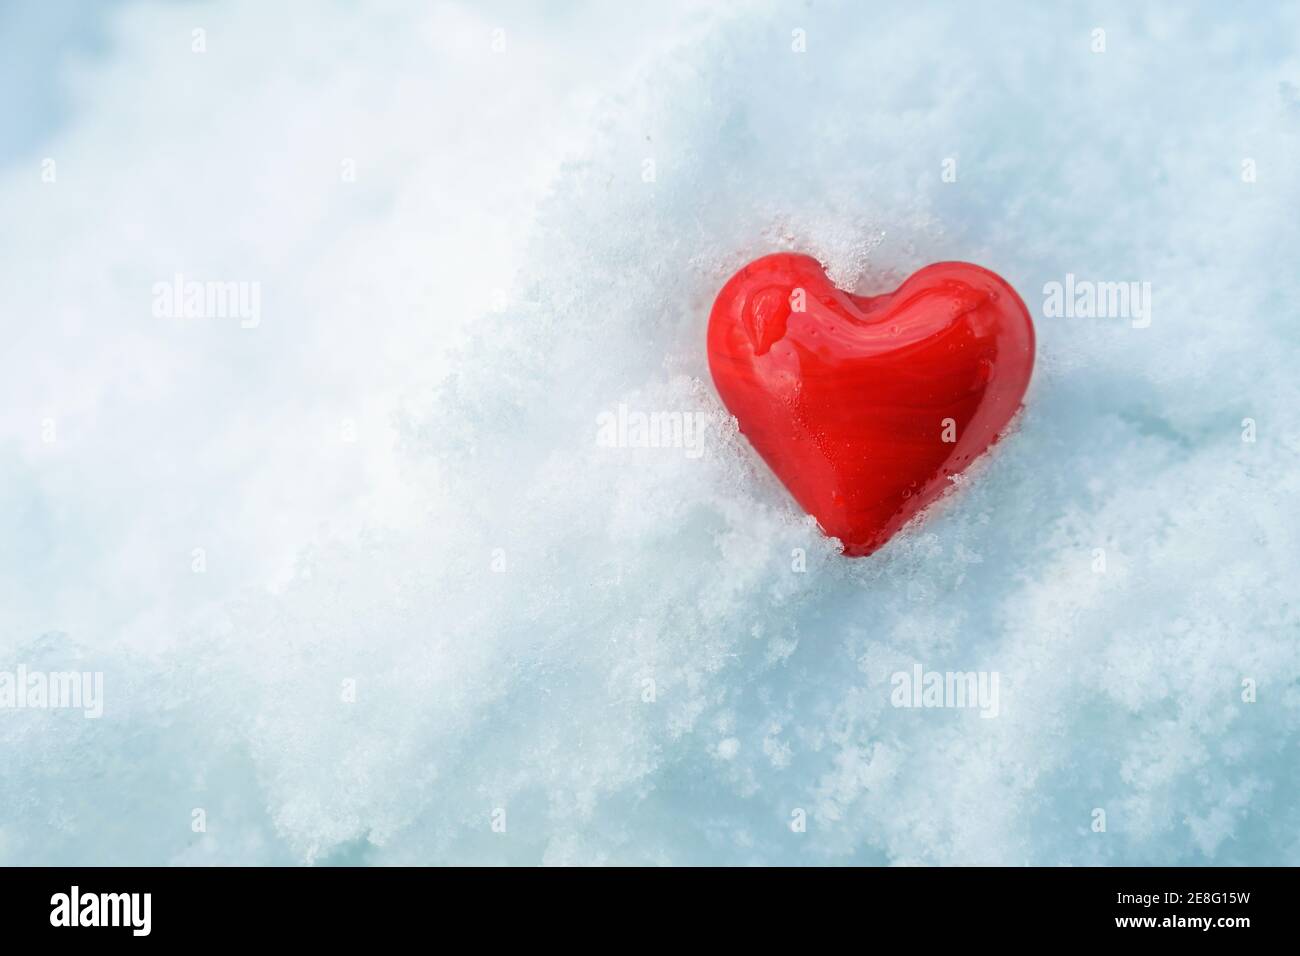 Heart shape made from red glass in the cold white snow, hot love symbol for seasonal holidays like valentines day or chrismas, copy space, selected fo Stock Photo